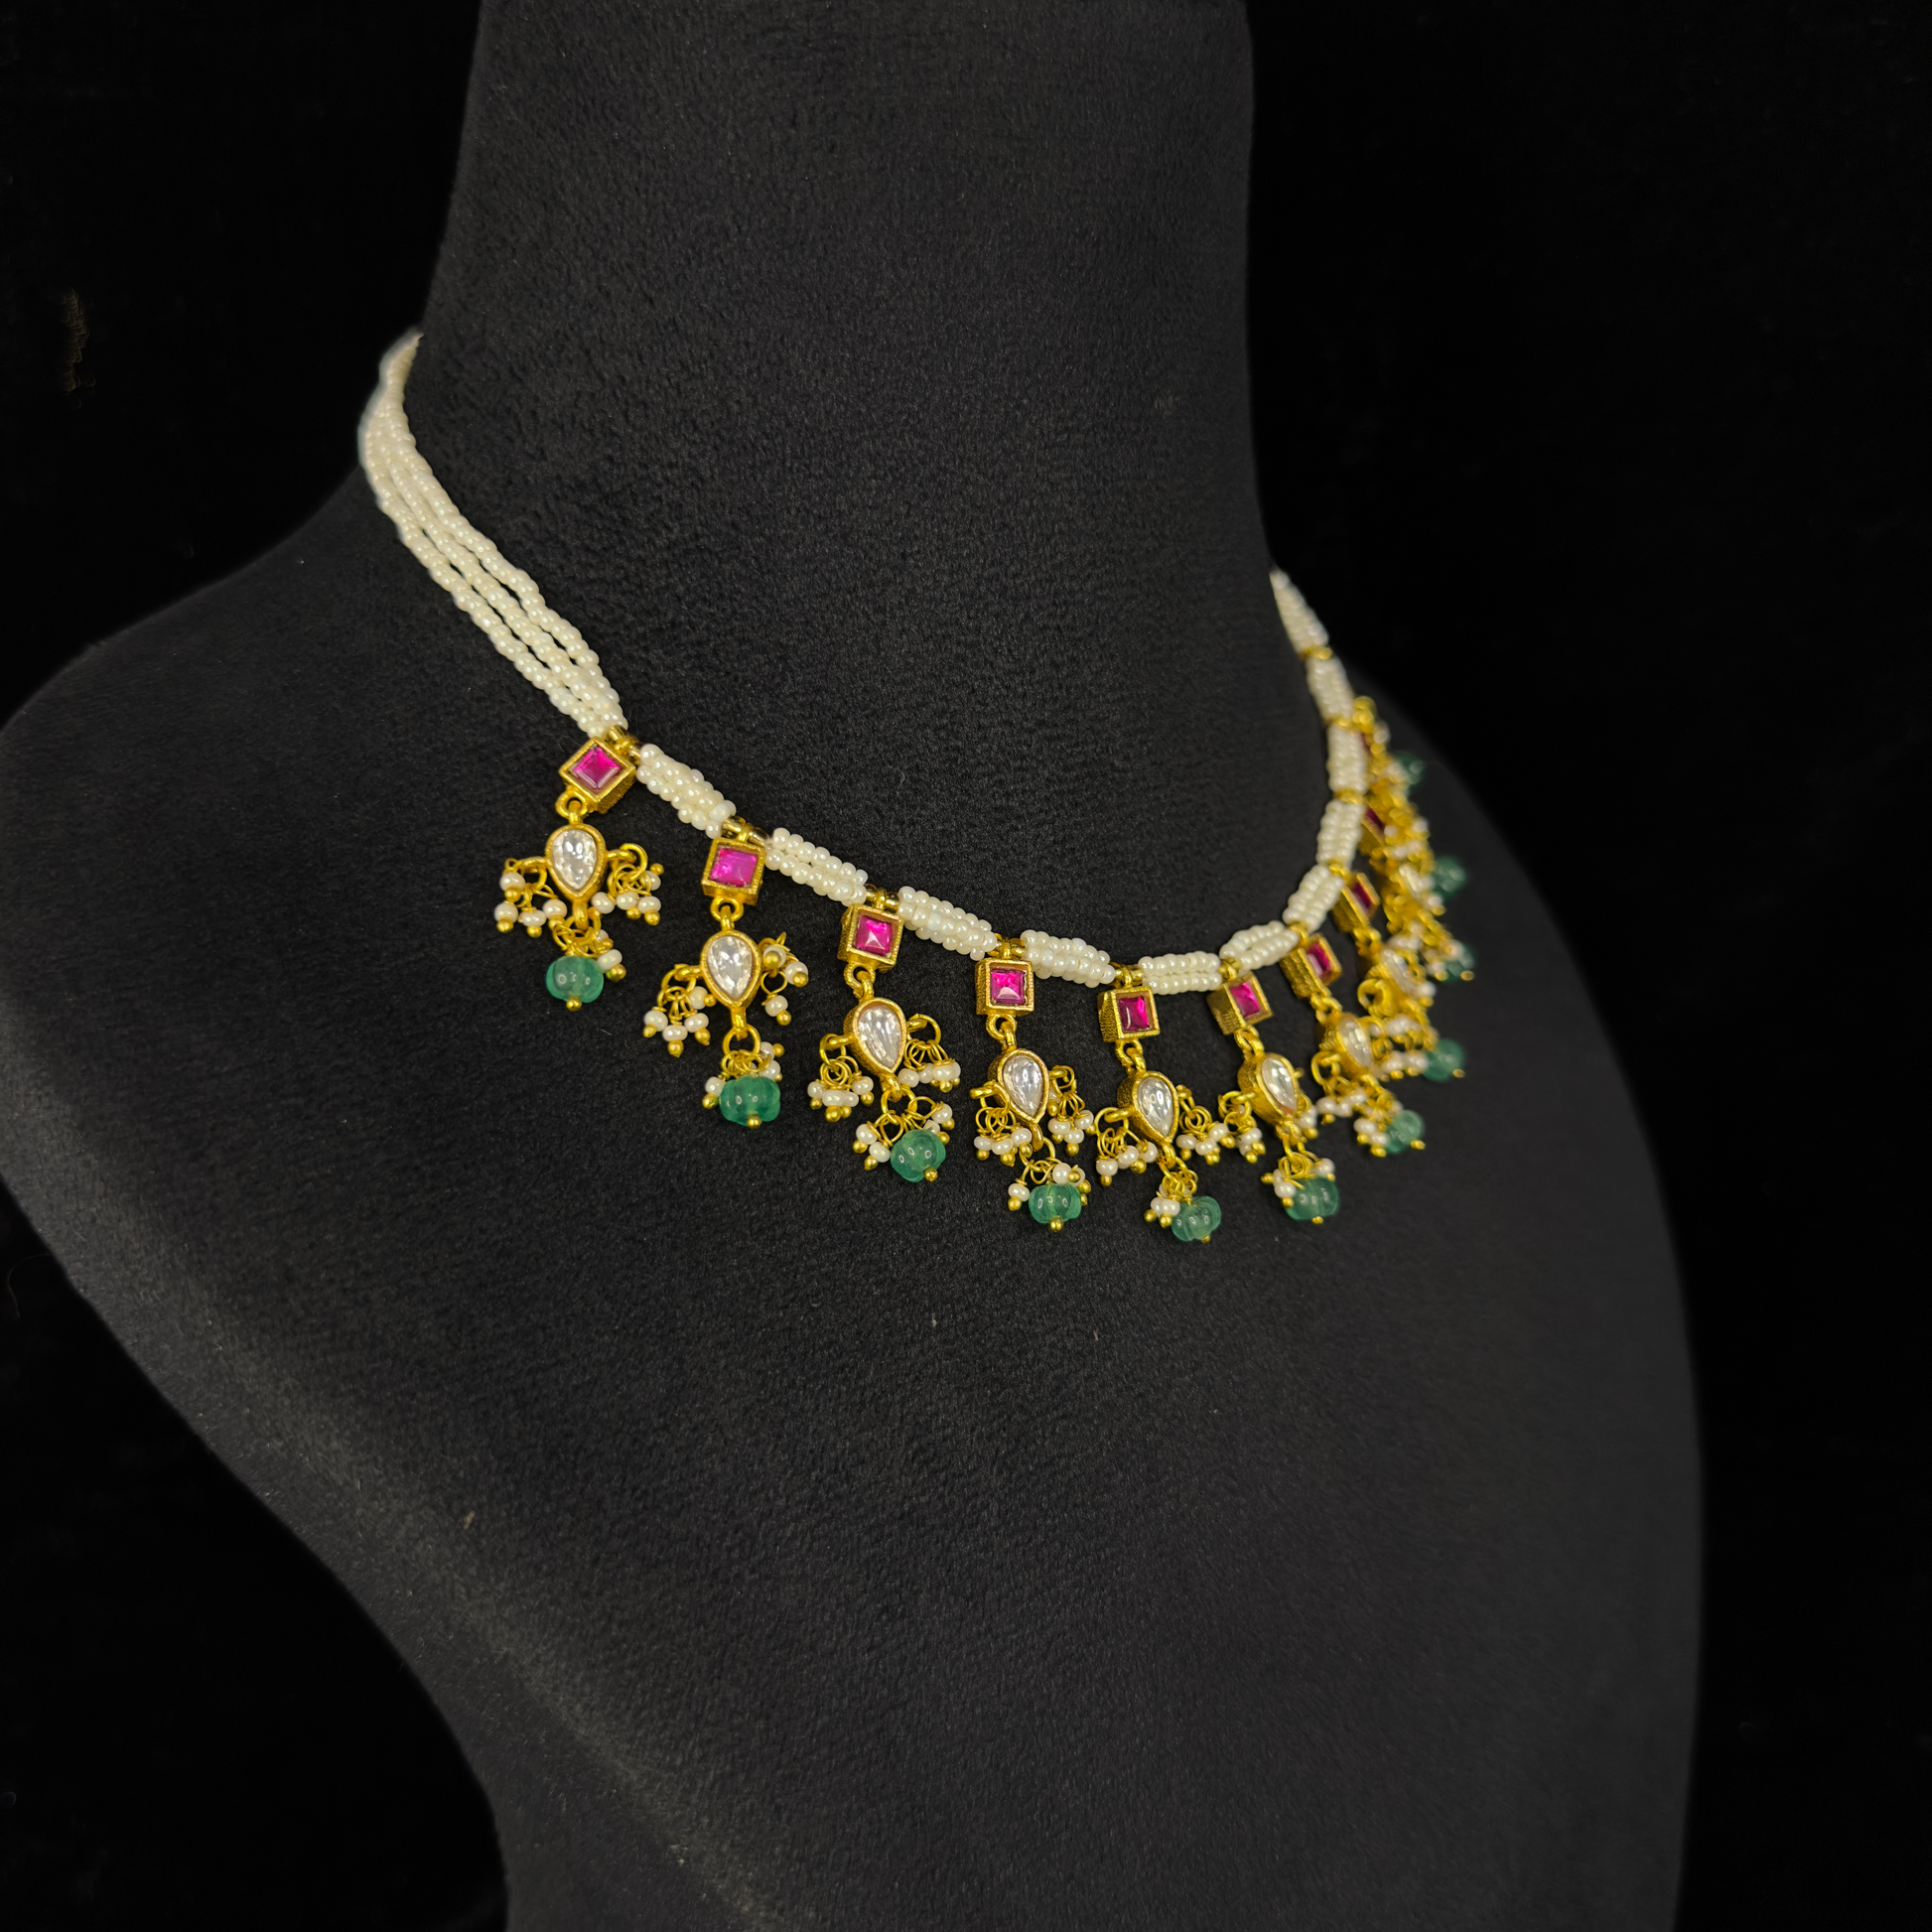 Exquisite Jadau Kundan Pearl Chain Necklace Set with Green Beads with 22k gold plating. This product belongds in jadau kundan jewellery category